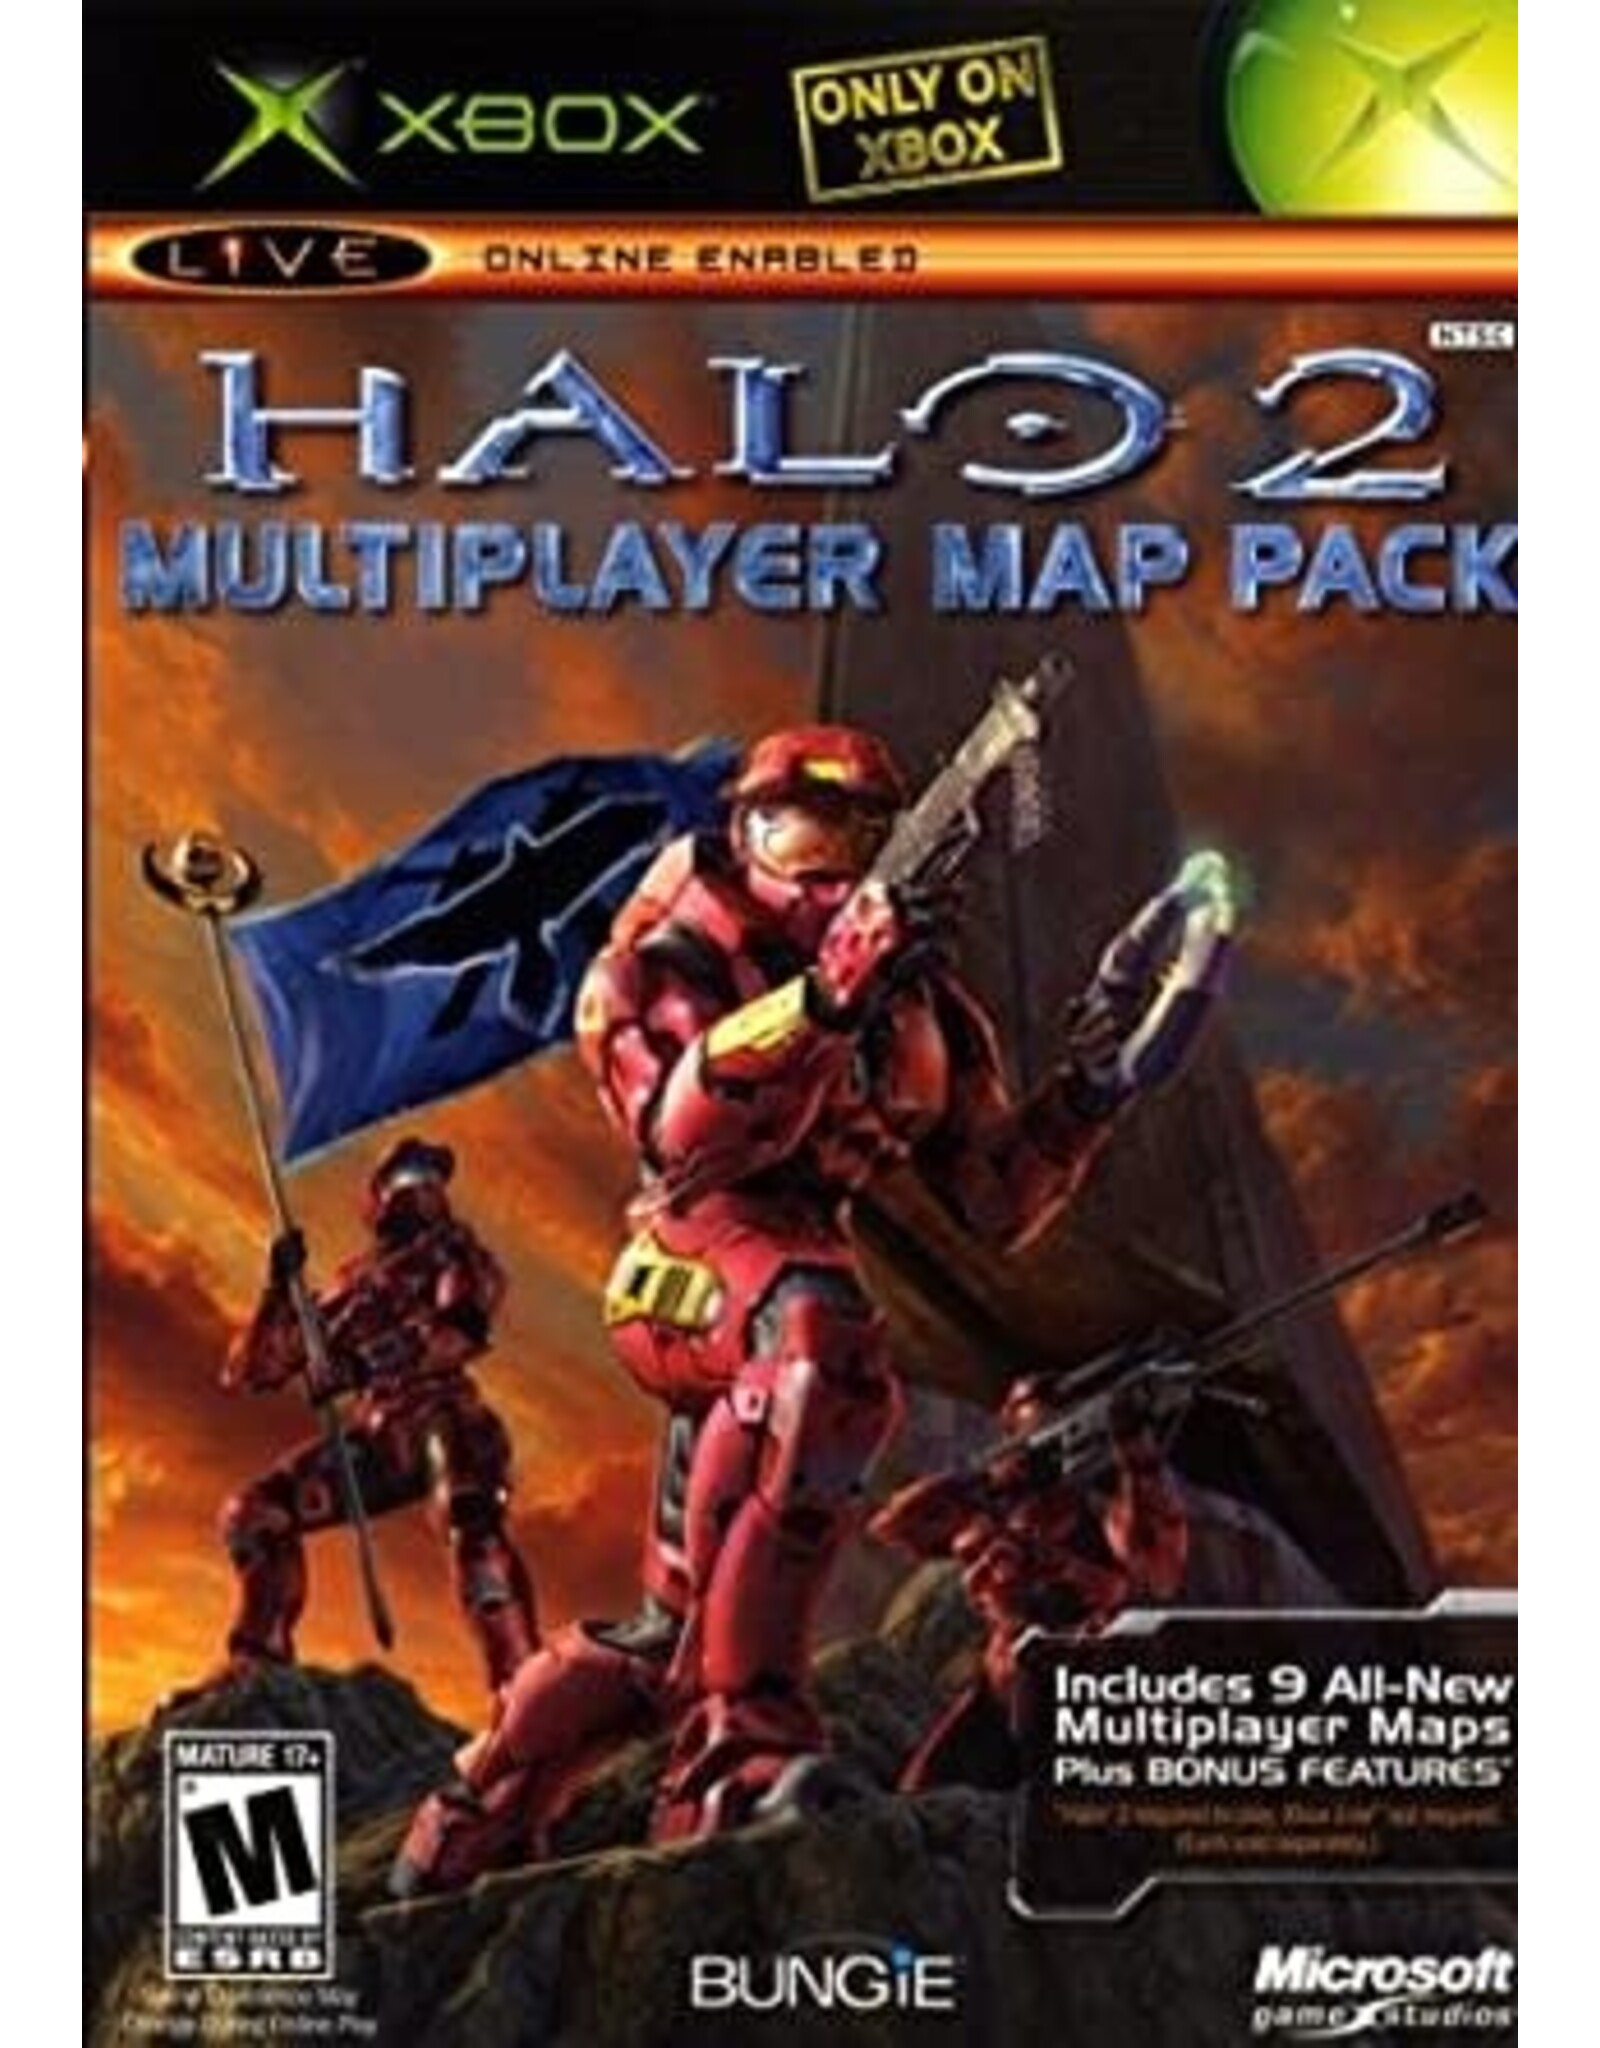 Xbox Halo 2 Multiplayer Map Pack (Used)